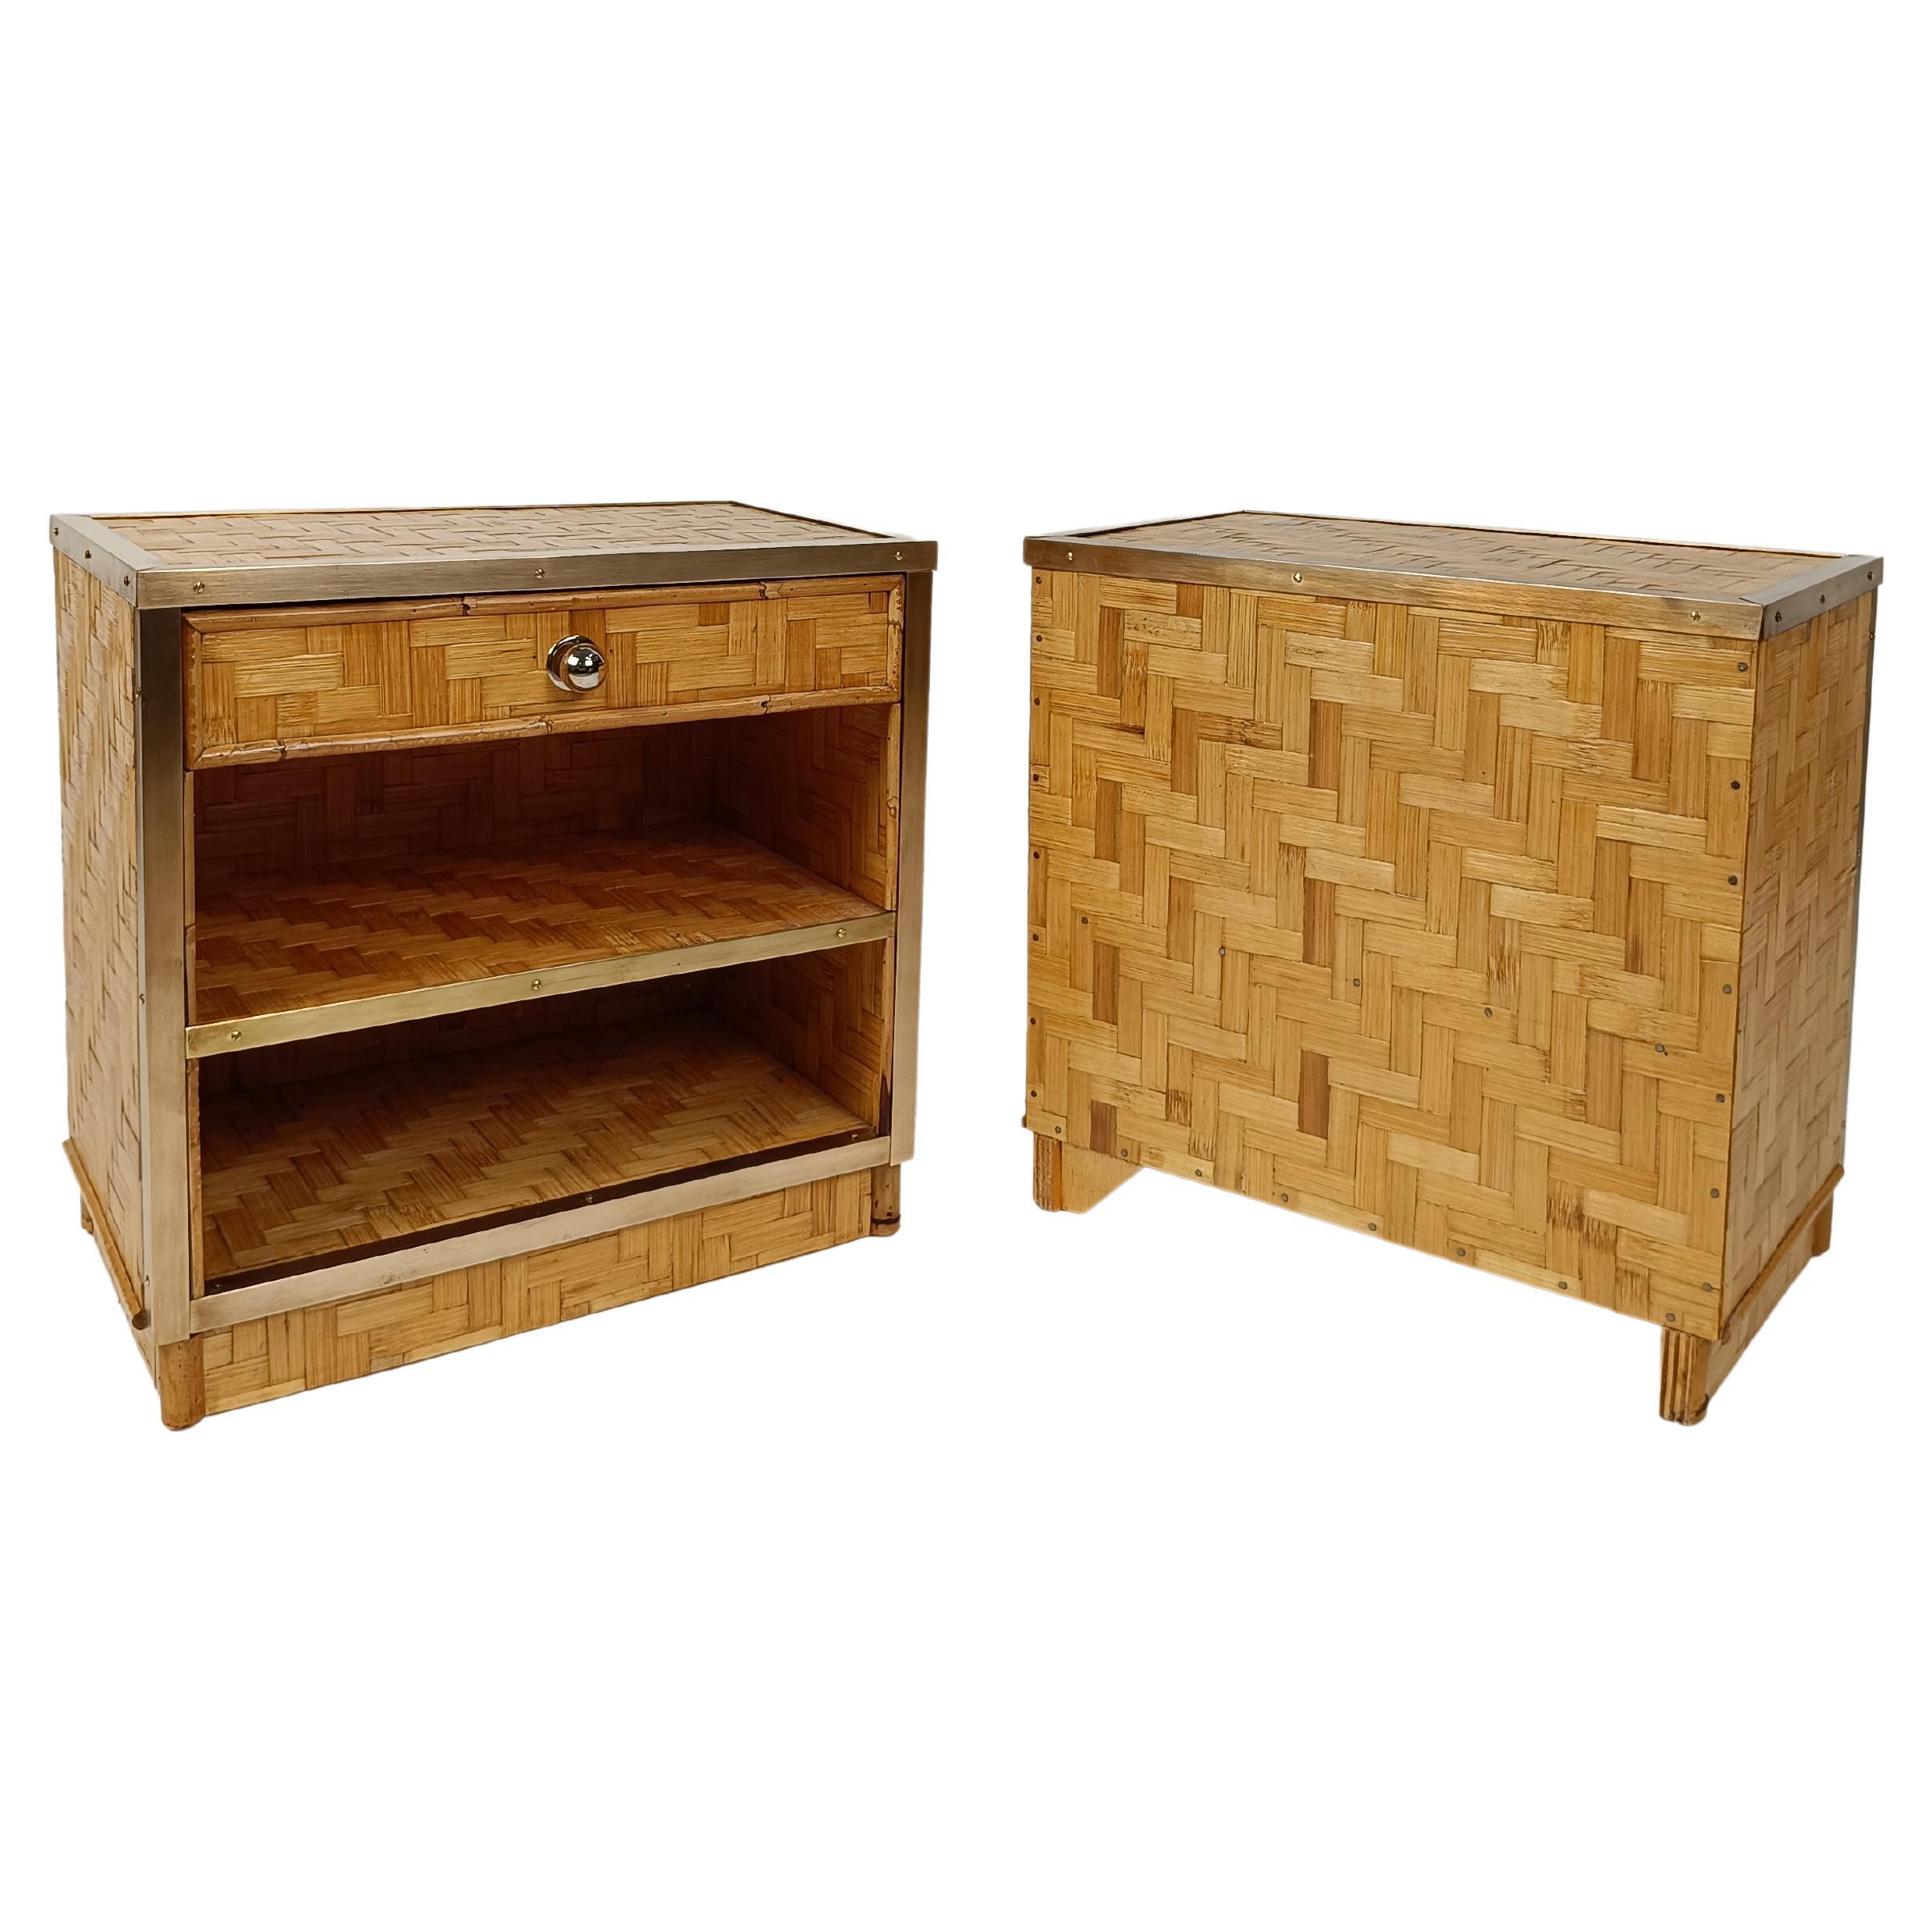 Midcentury Italian Bedside Tables in Bamboo Cane, Rattan and Brass, 1970s